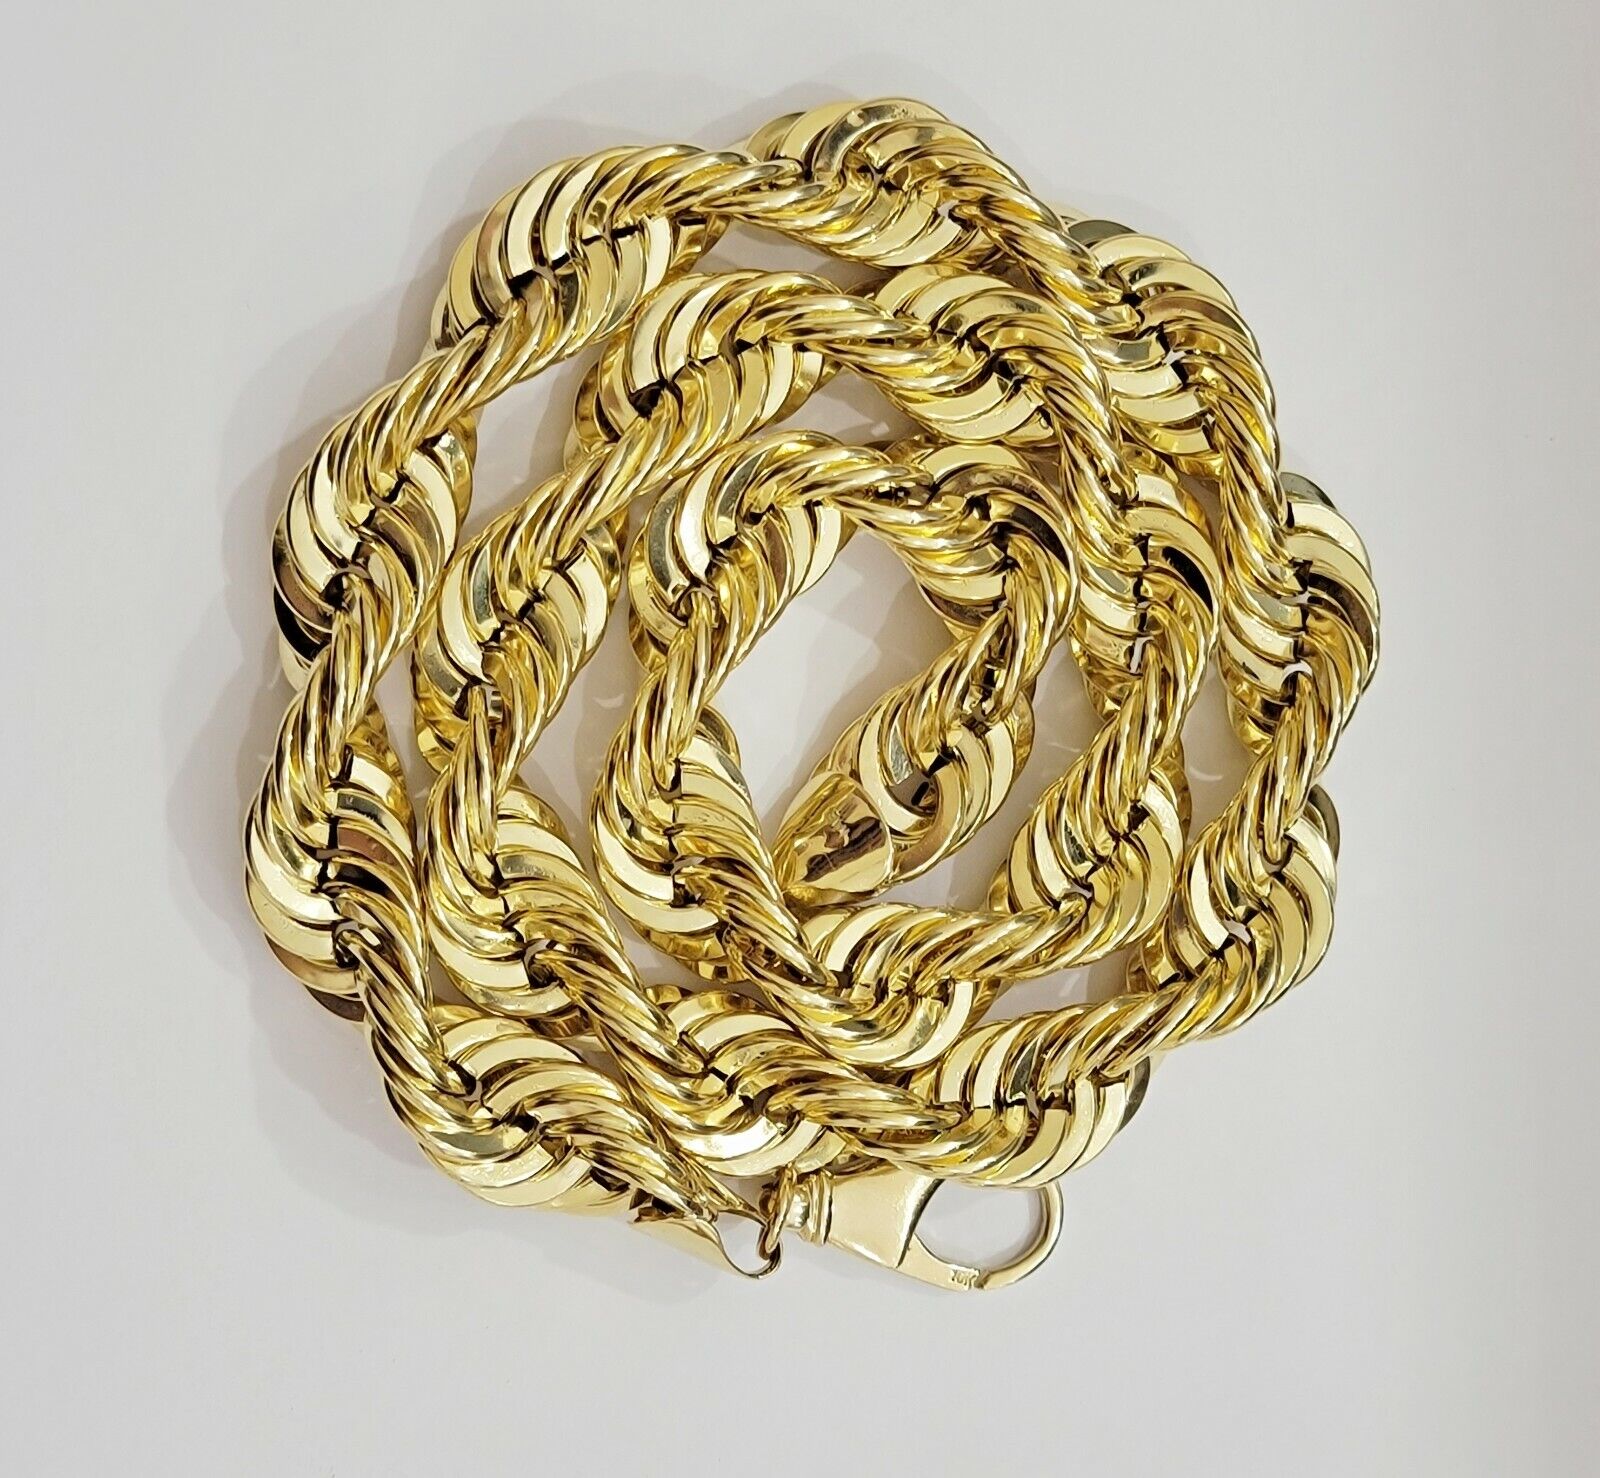 REAL 10k Gold Rope Chain Necklace 17mm Thick 30